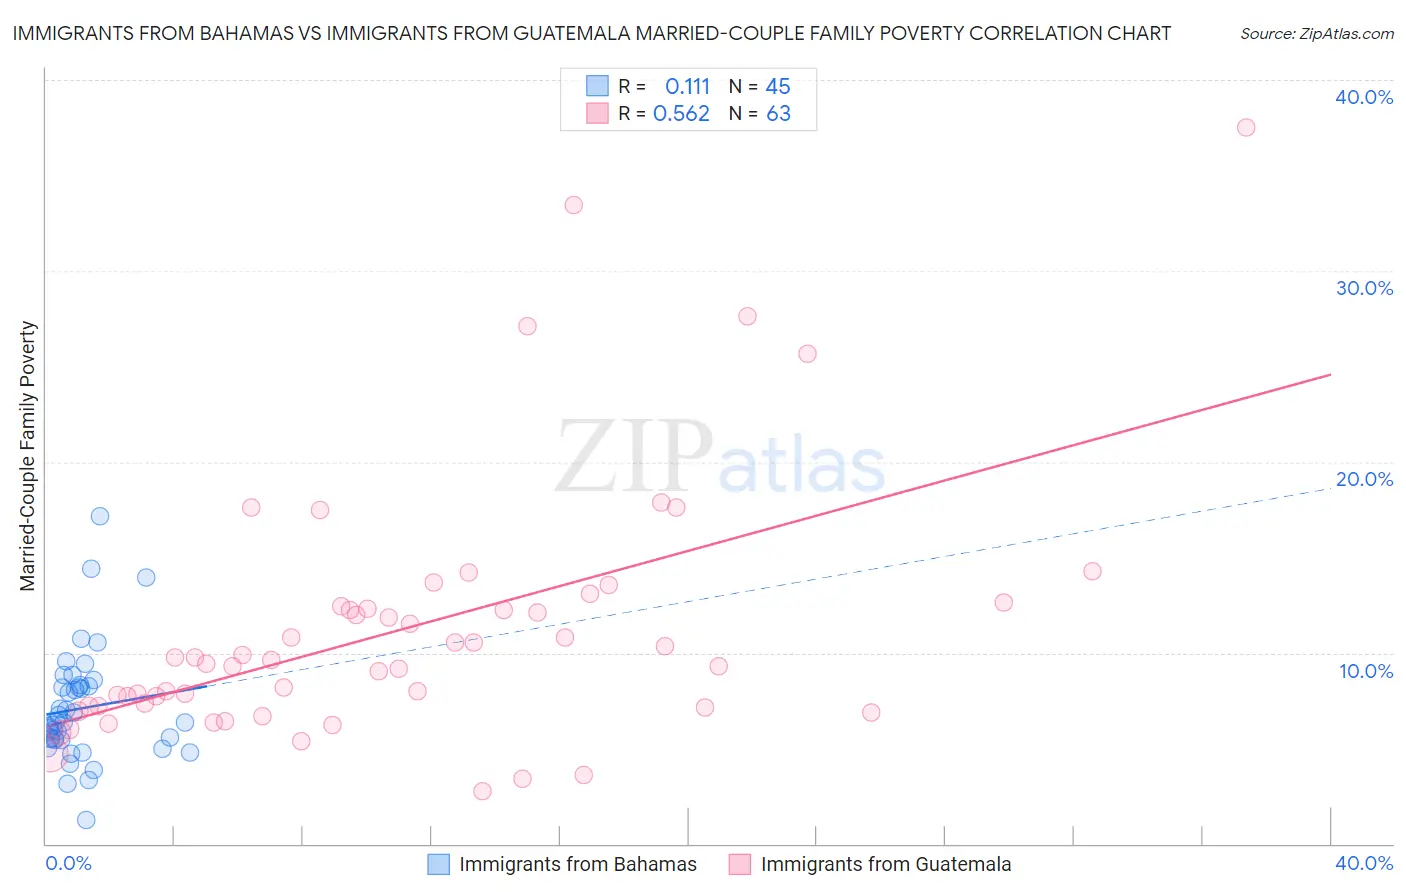 Immigrants from Bahamas vs Immigrants from Guatemala Married-Couple Family Poverty